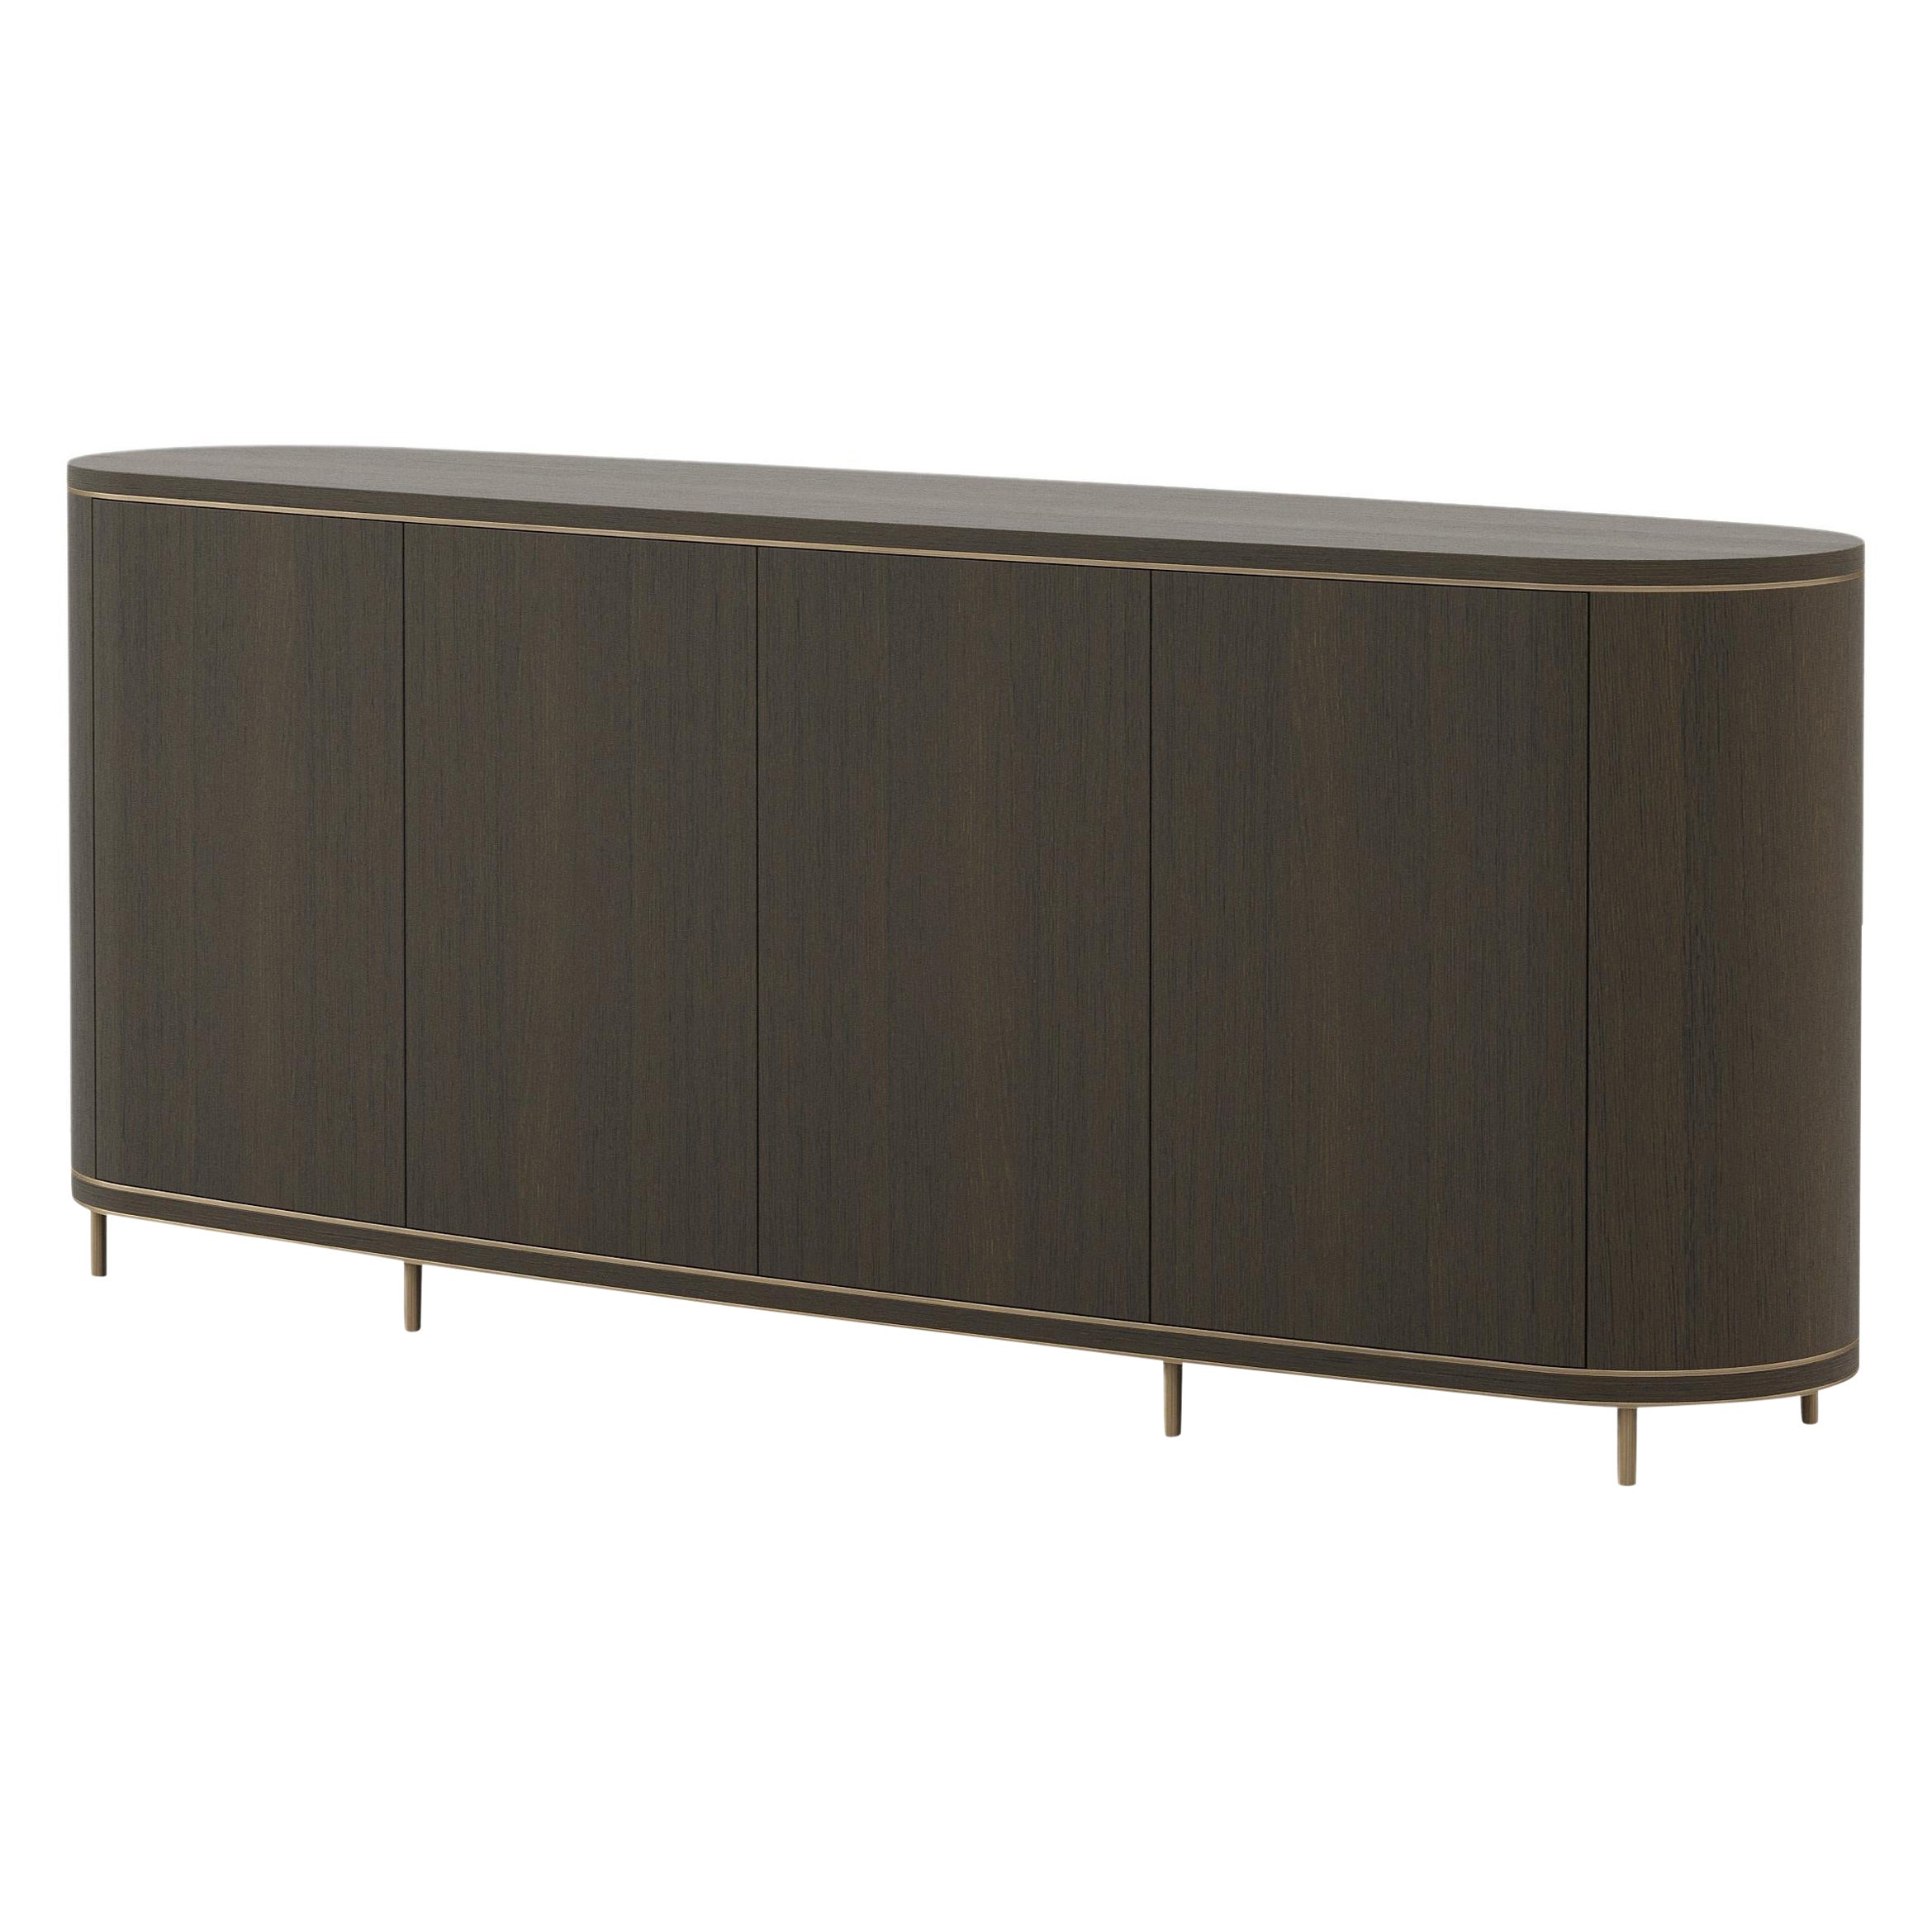 Modern Cannes Sideboard Made with Oak and Brass, Handmade by Stylish Club